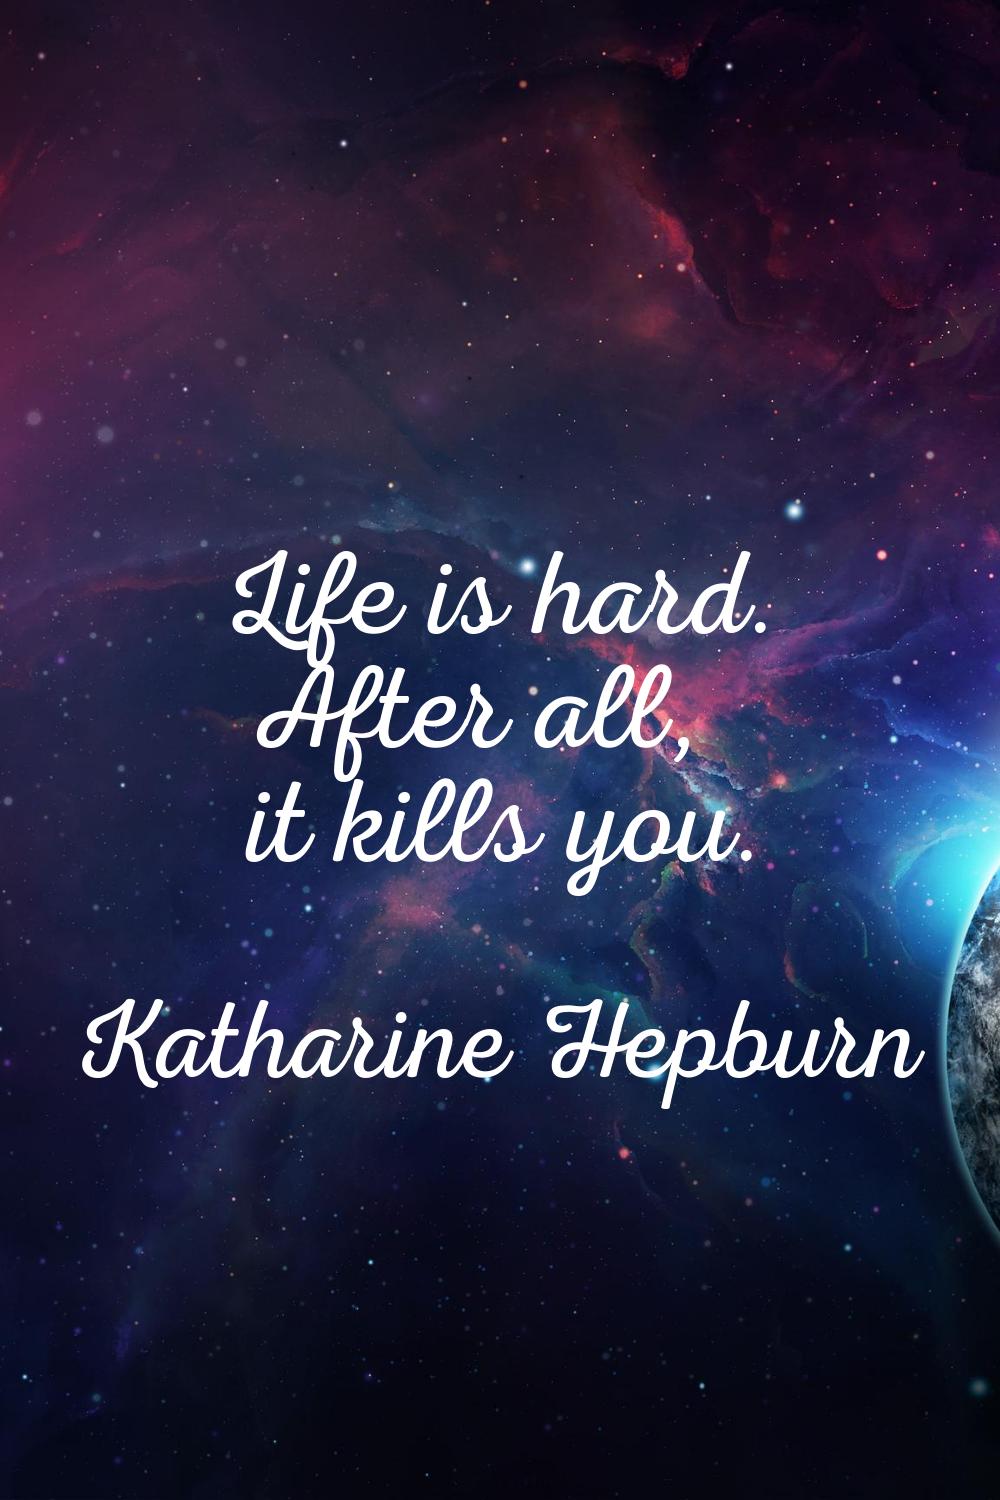 Life is hard. After all, it kills you.